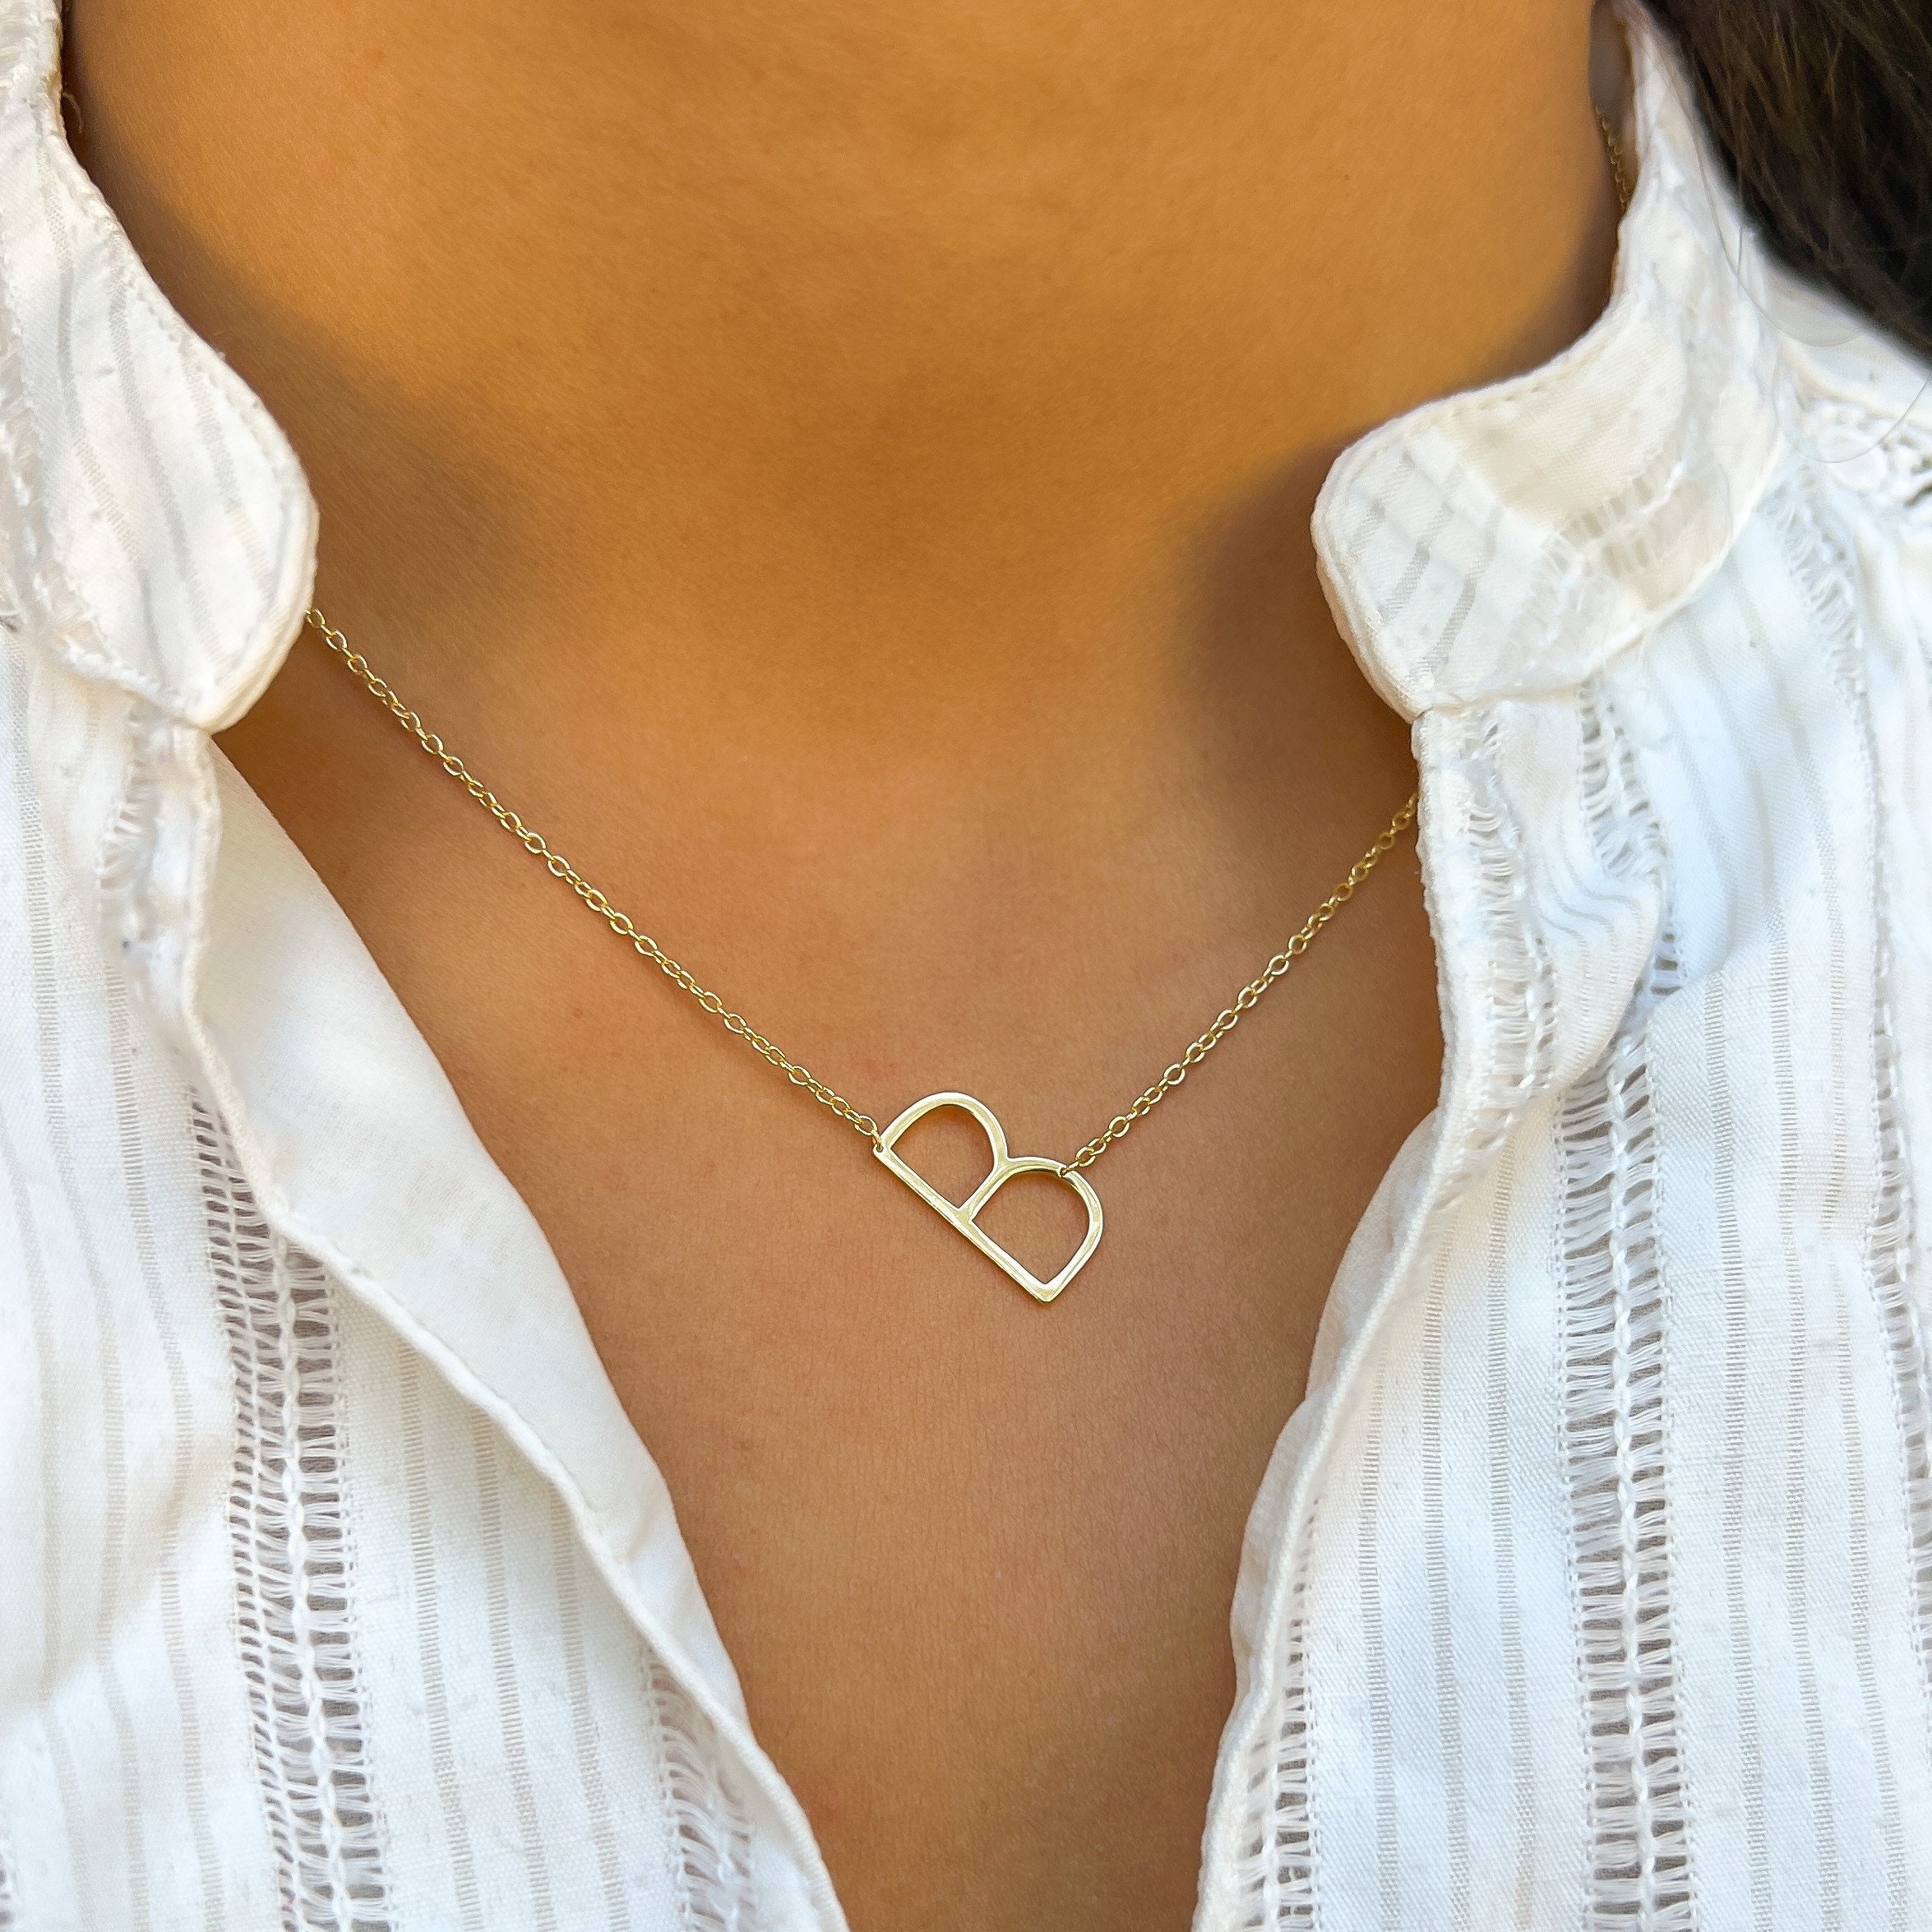 Buy Glimmerst Initial Heart Necklace,18K Gold Plated Stainless Steel Tiny  Heart Letter B Necklace Personalized Monogram Name Necklace for Women Girls  at Amazon.in